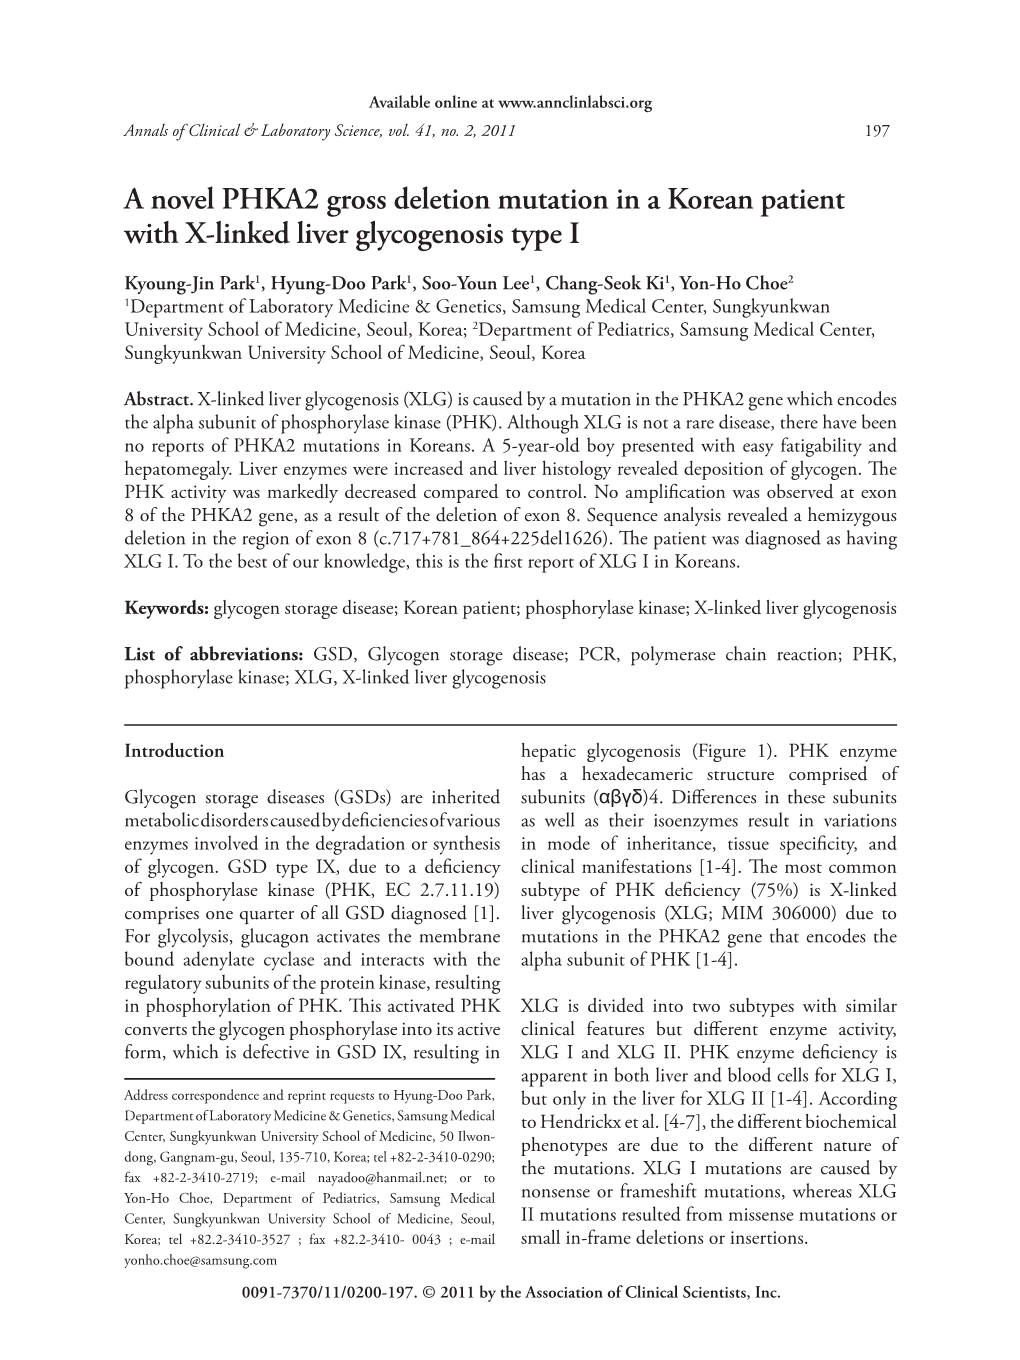 A Novel PHKA2 Gross Deletion Mutation in a Korean Patient with X-Linked Liver Glycogenosis Type I